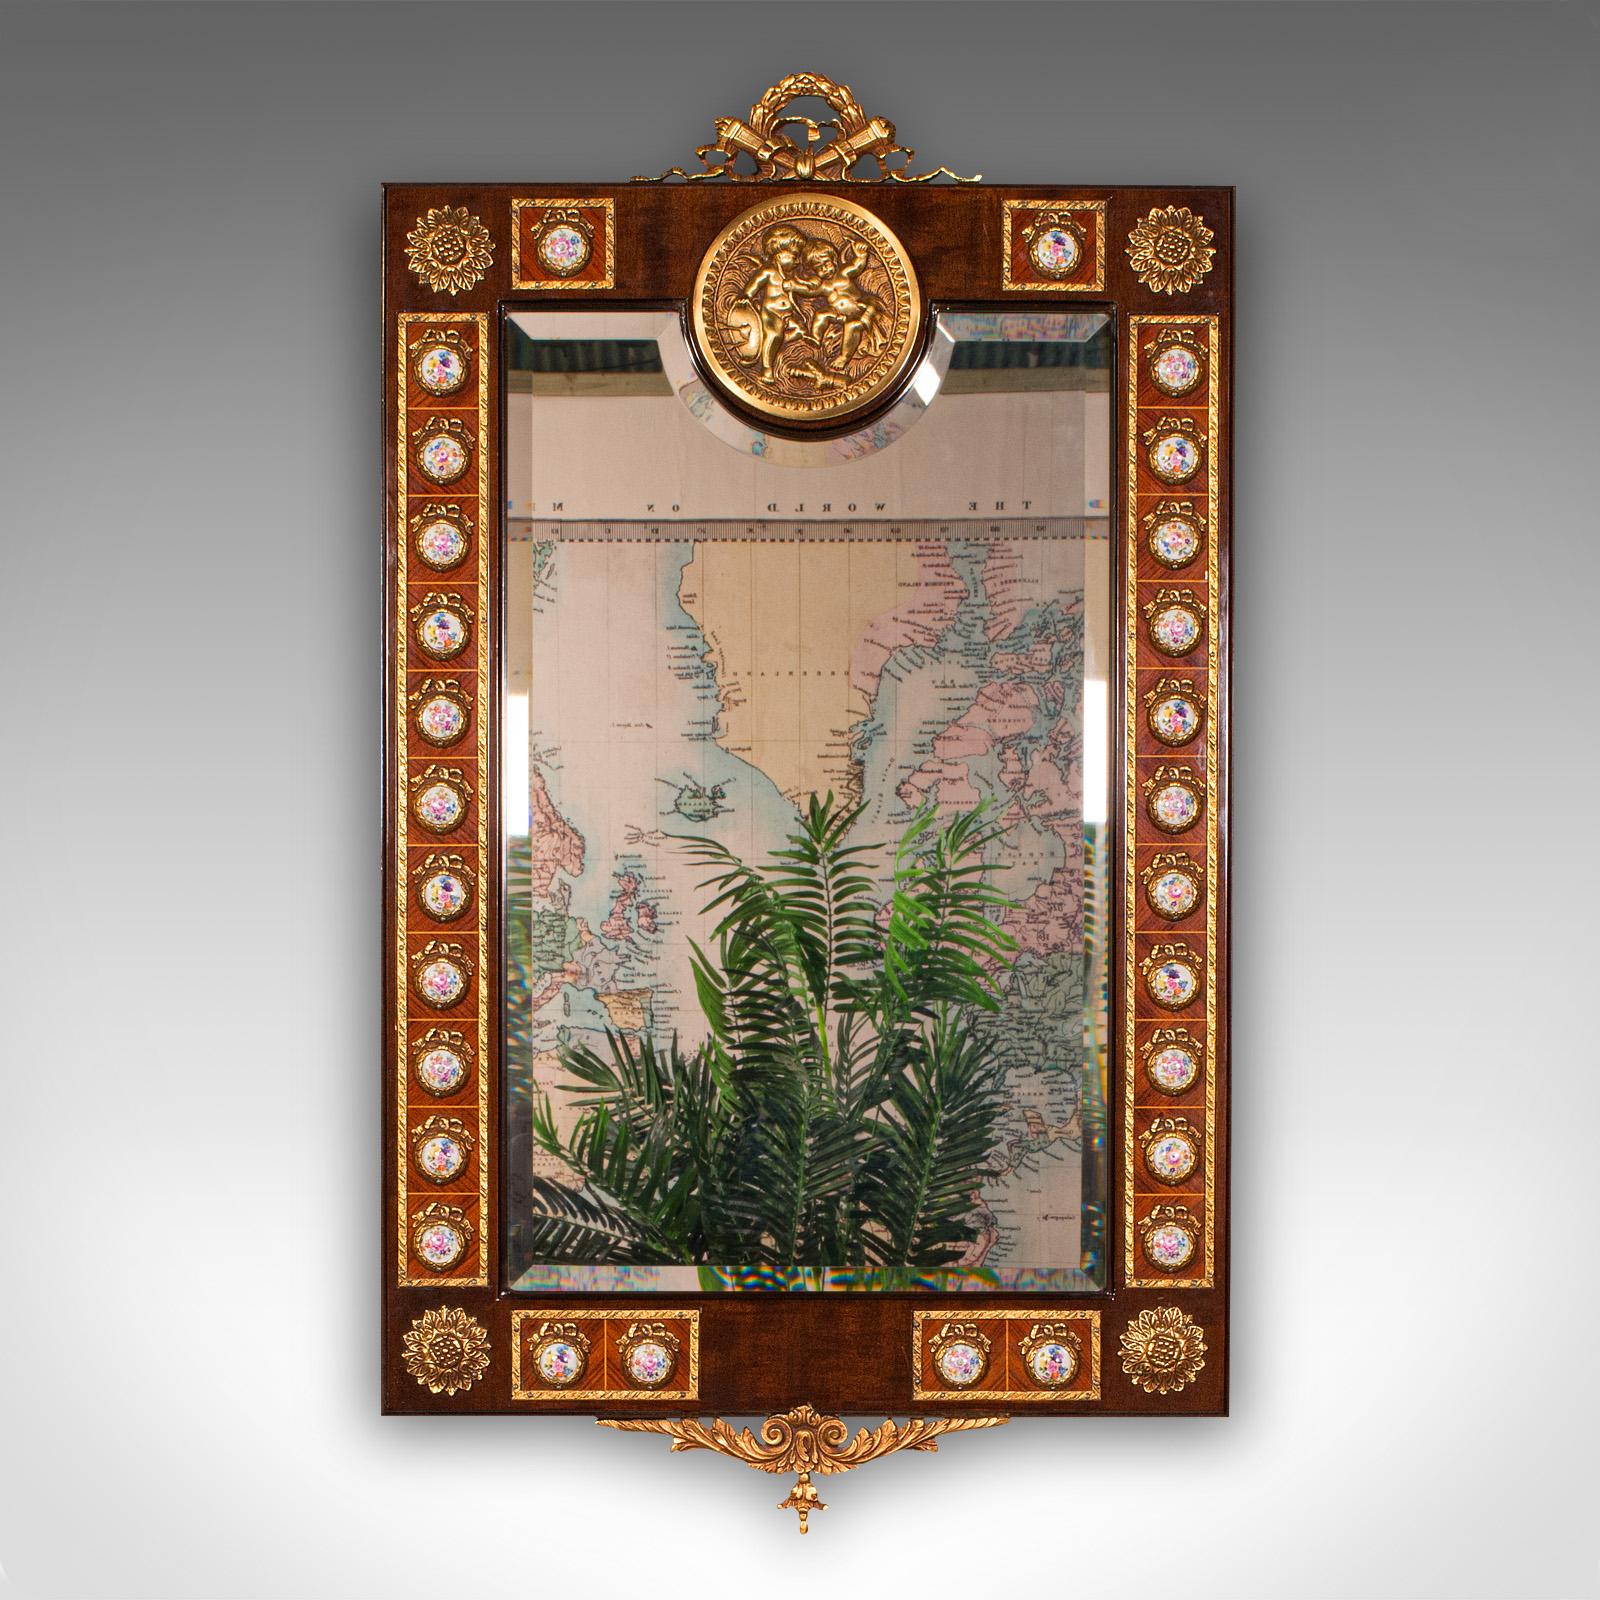 This is a large vintage overmantle mirror. A Continental, walnut decorative mirror in Italianate taste, dating to the late 20th century, circa 1970.

Strikingly ornate, with superb craftsmanship and highly distinctive
Displaying a desirable aged